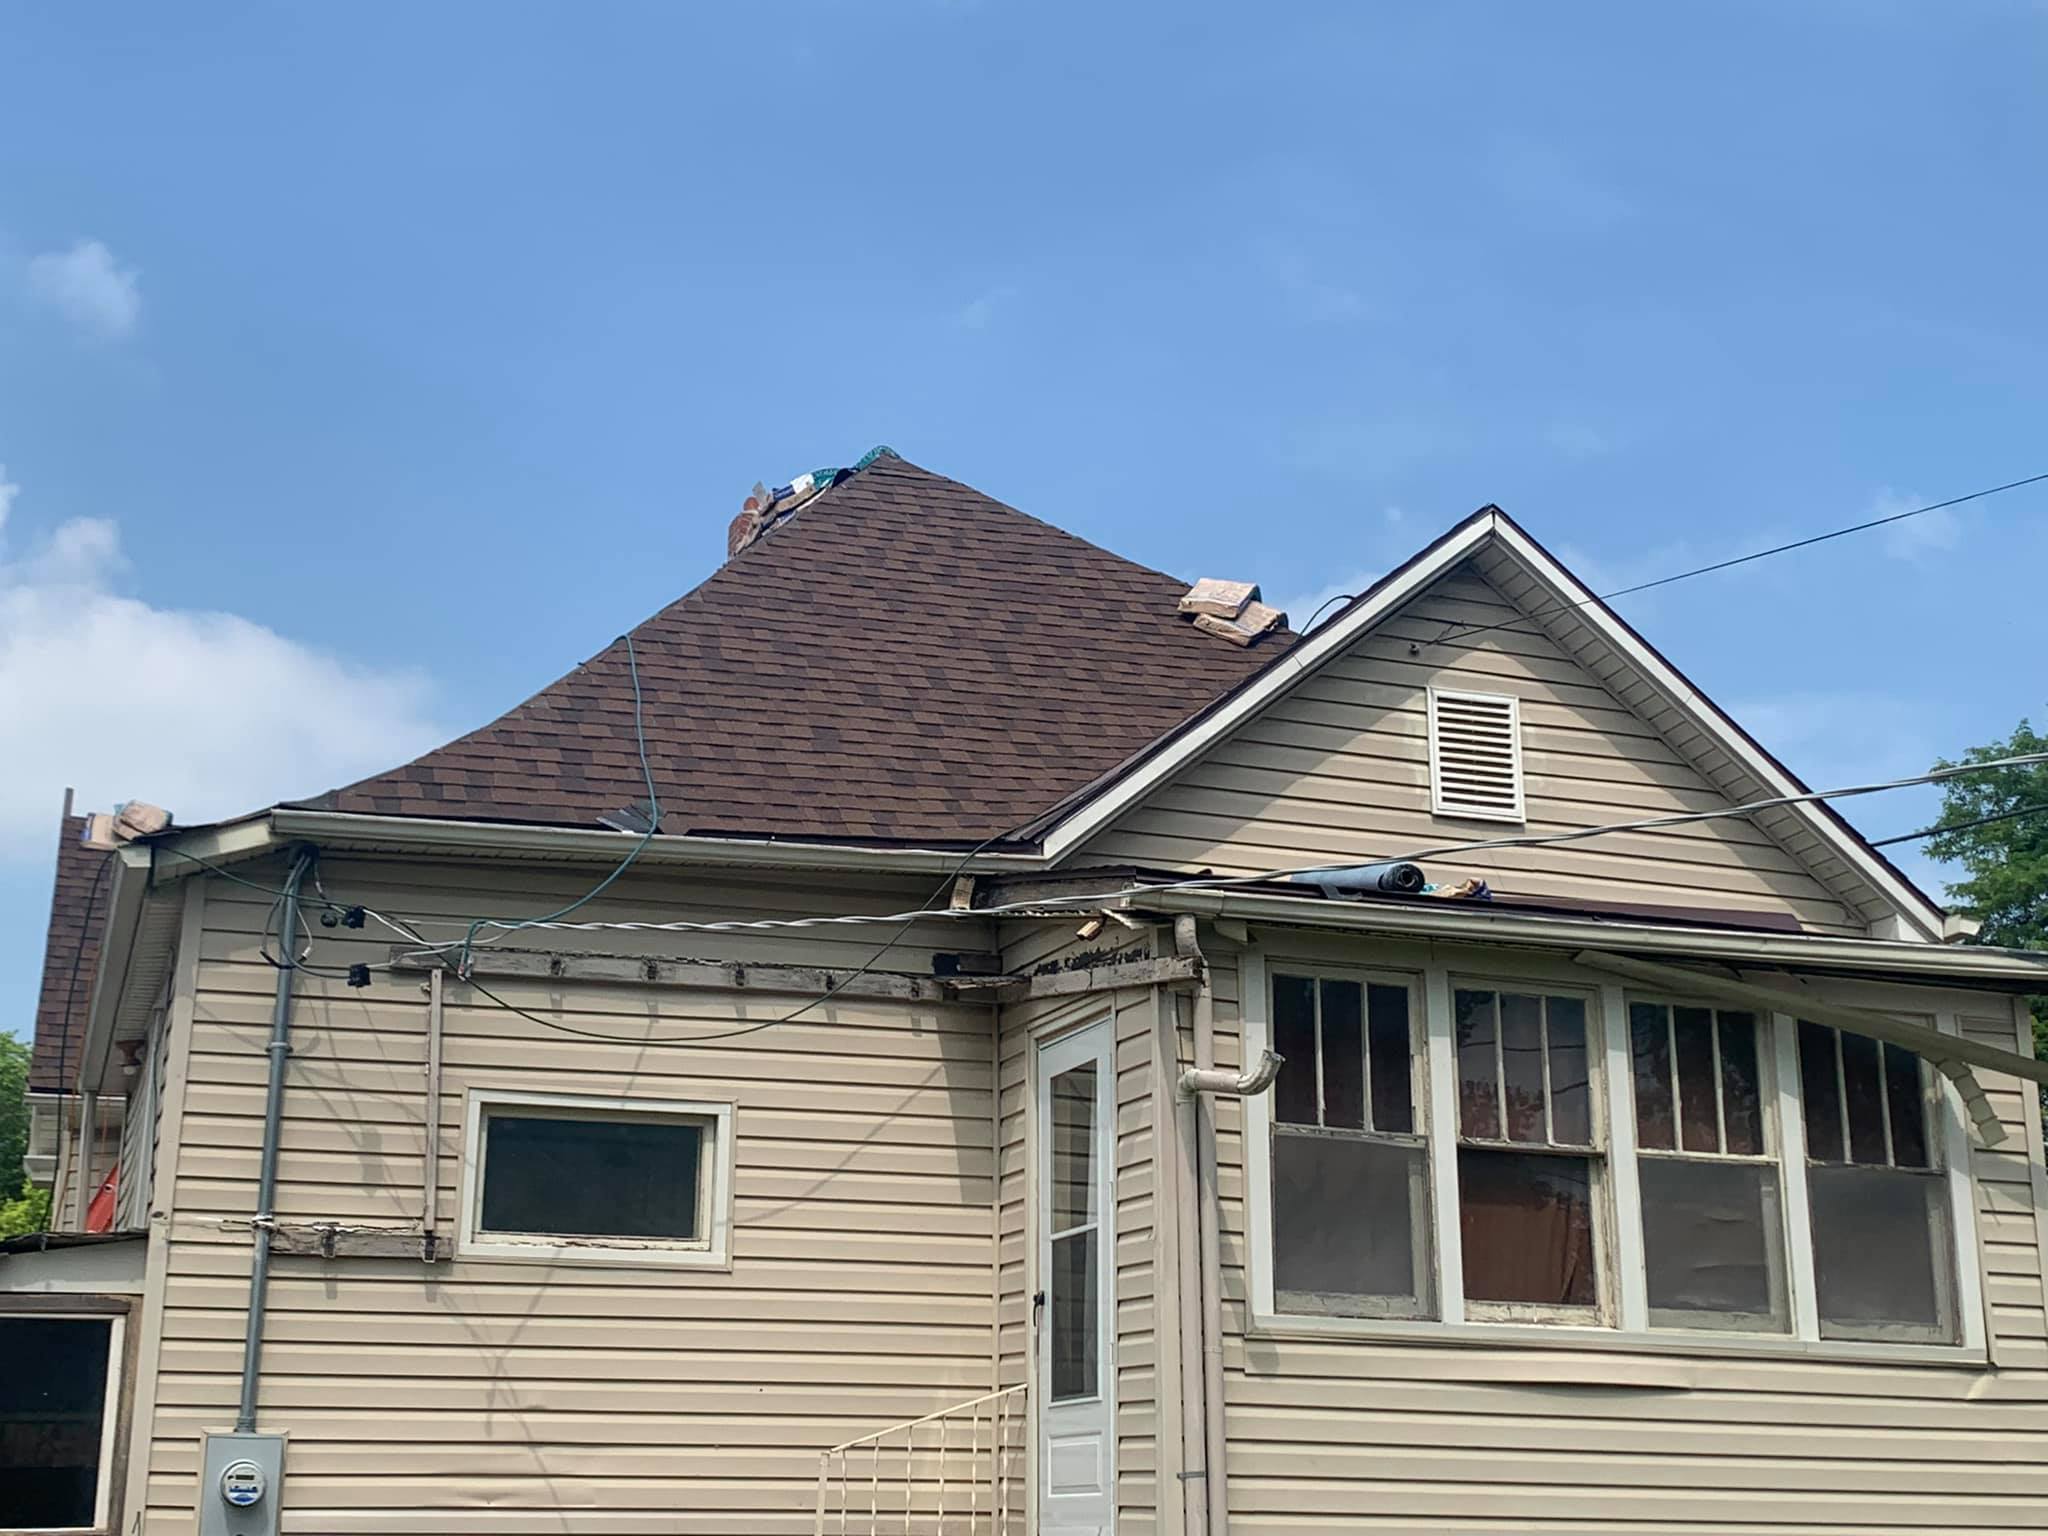 Roof Repair Kearney Missouri - Tips For Finding The Right One